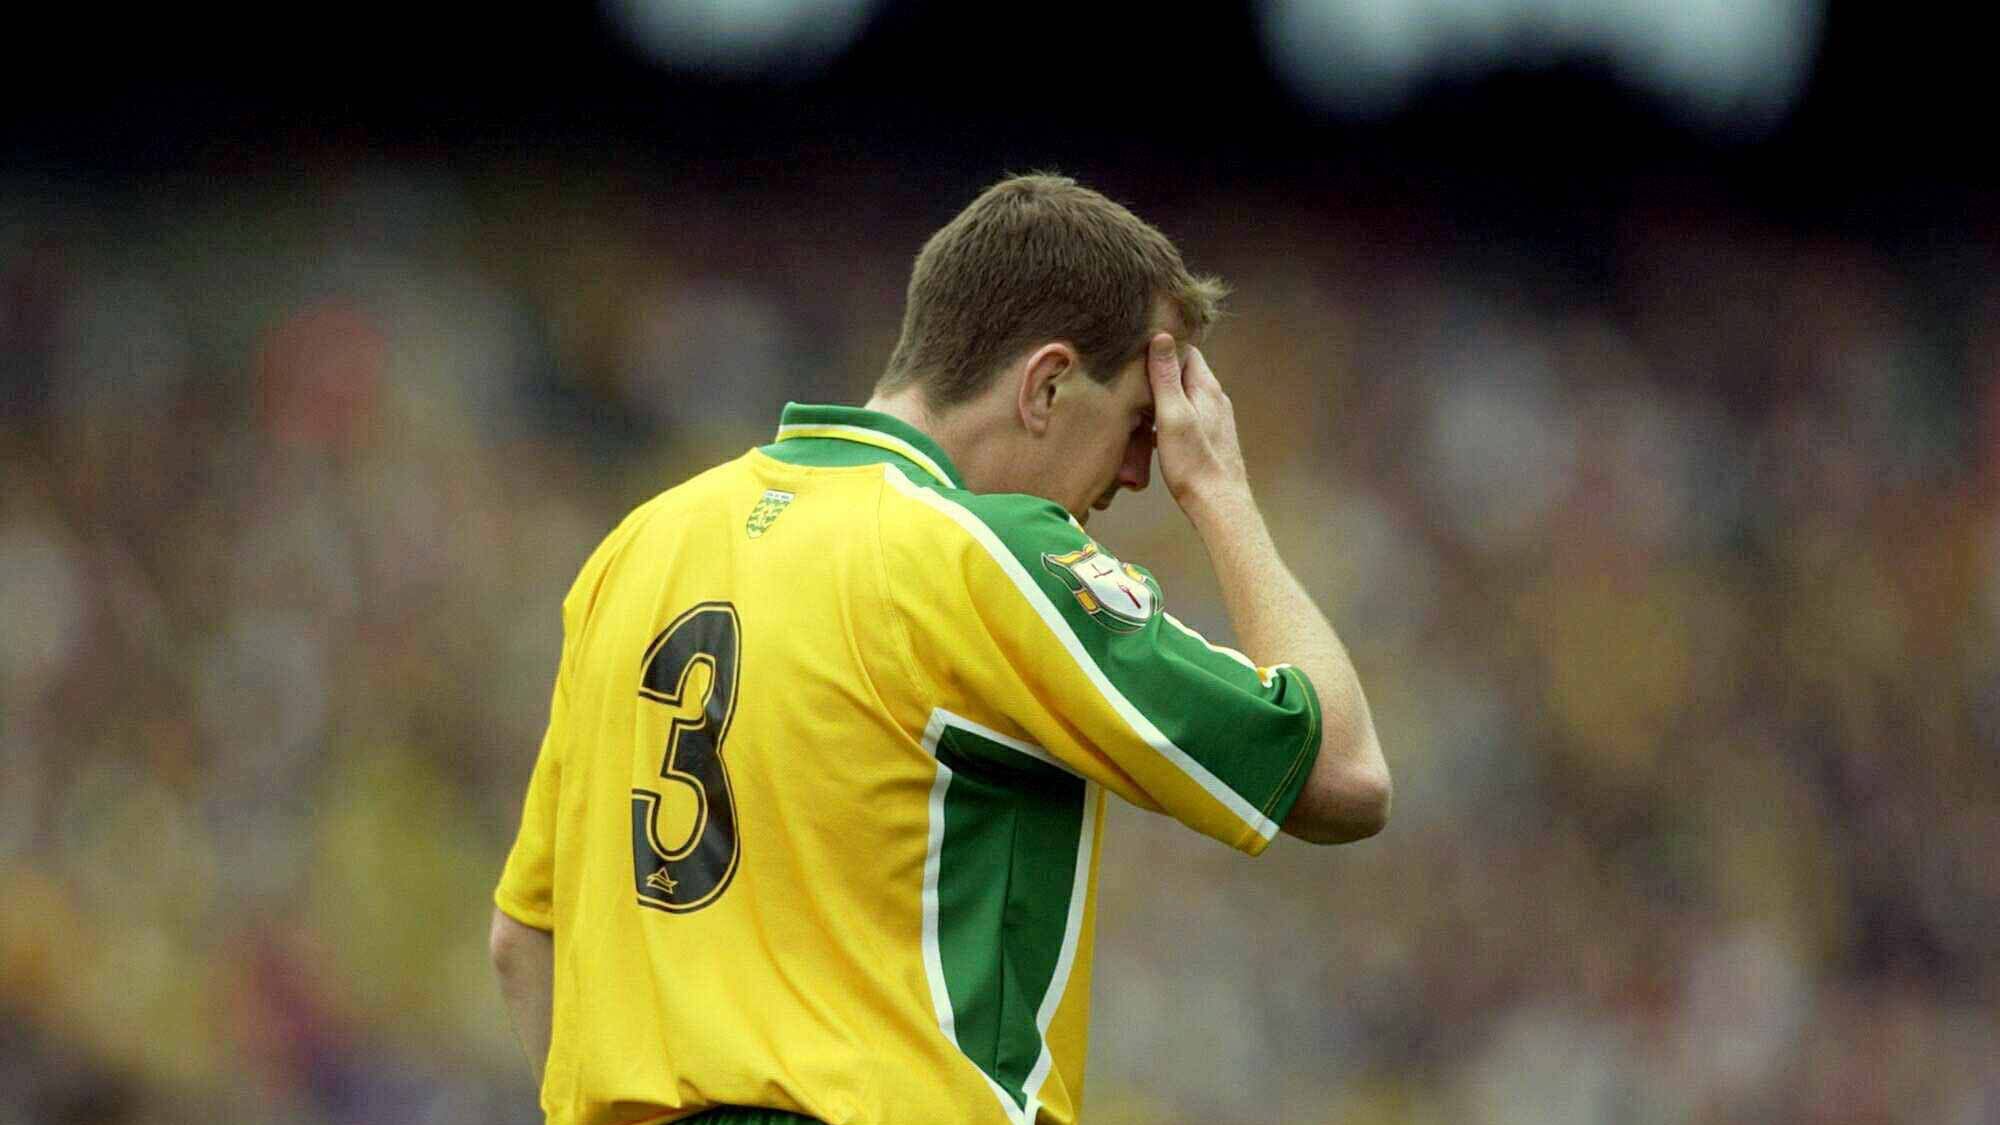 Raymond Sweeney after being sent off by referee Michael Monahan during the 2003 All-Ireland Senior Football Championship Semi-Final between Armagh and Donegal at Croke Park in Dublin. Photo by Ray McManus/Sportsfile